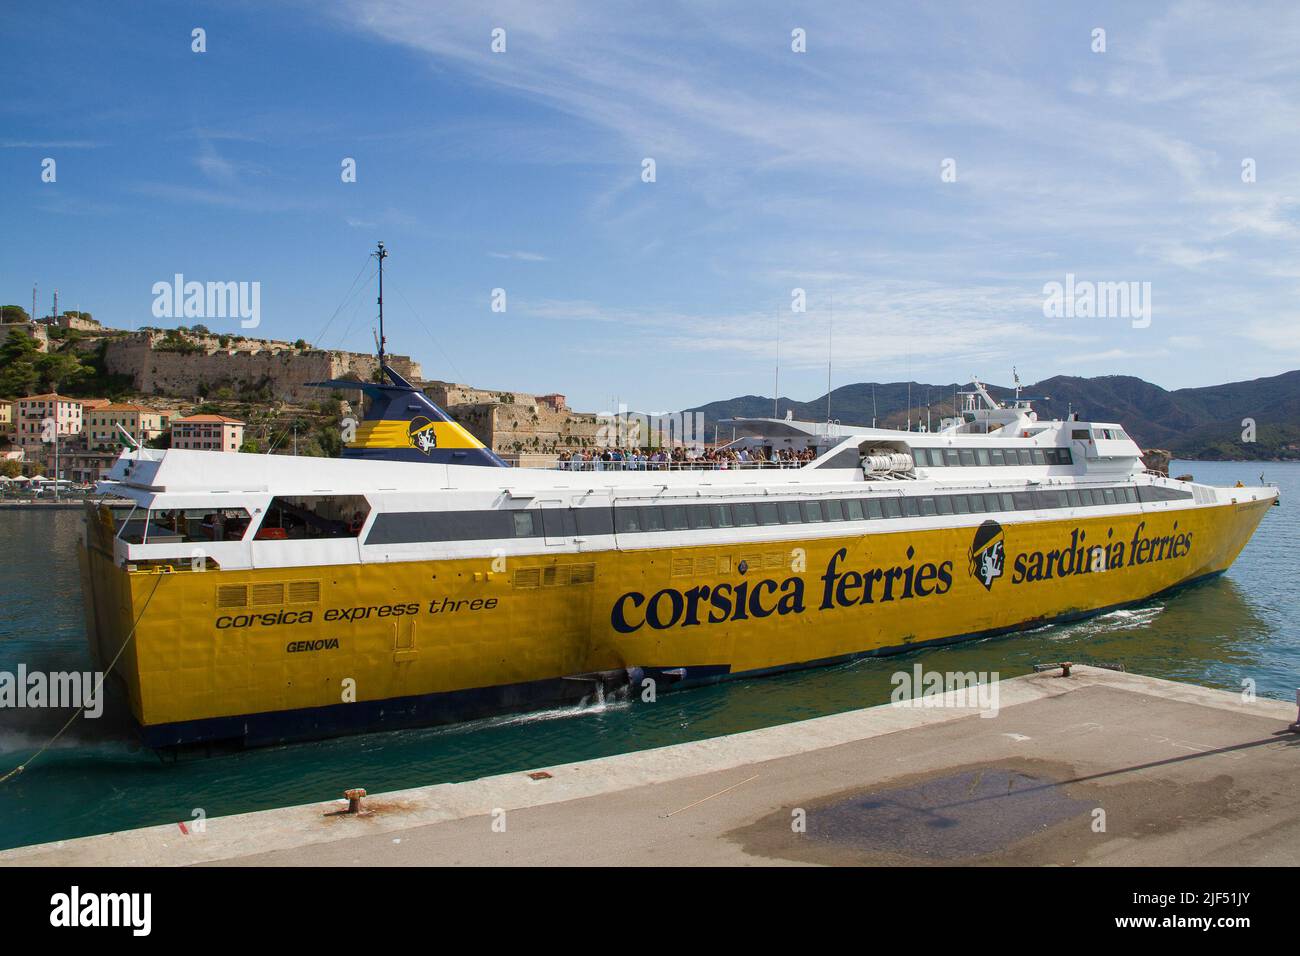 A ferry of carrier Corsia ferries departing the port of Portoferraio in Italy Stock Photo